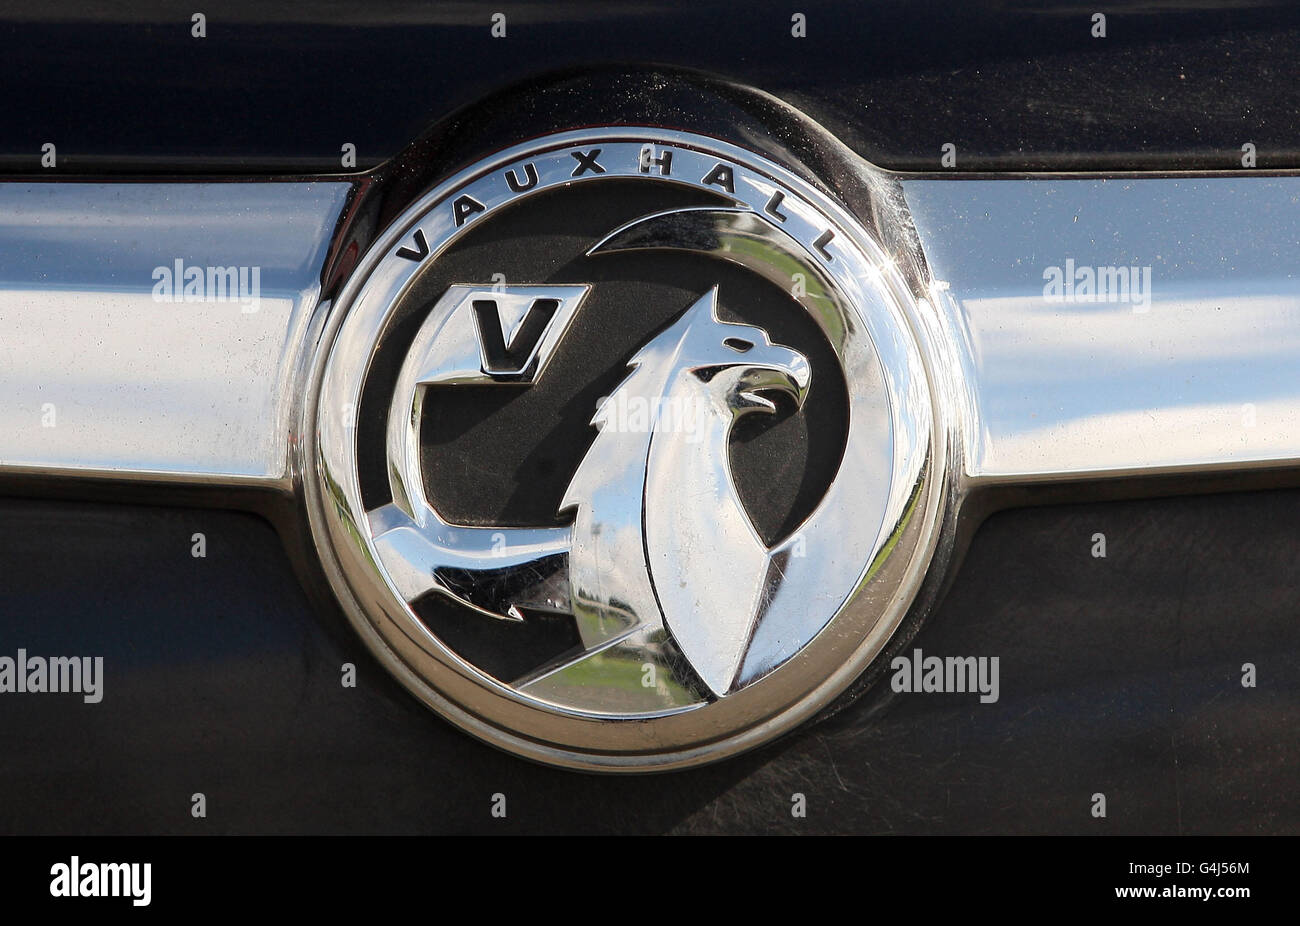 Vauxhall unveils new flat logo and word mark, joining a host of